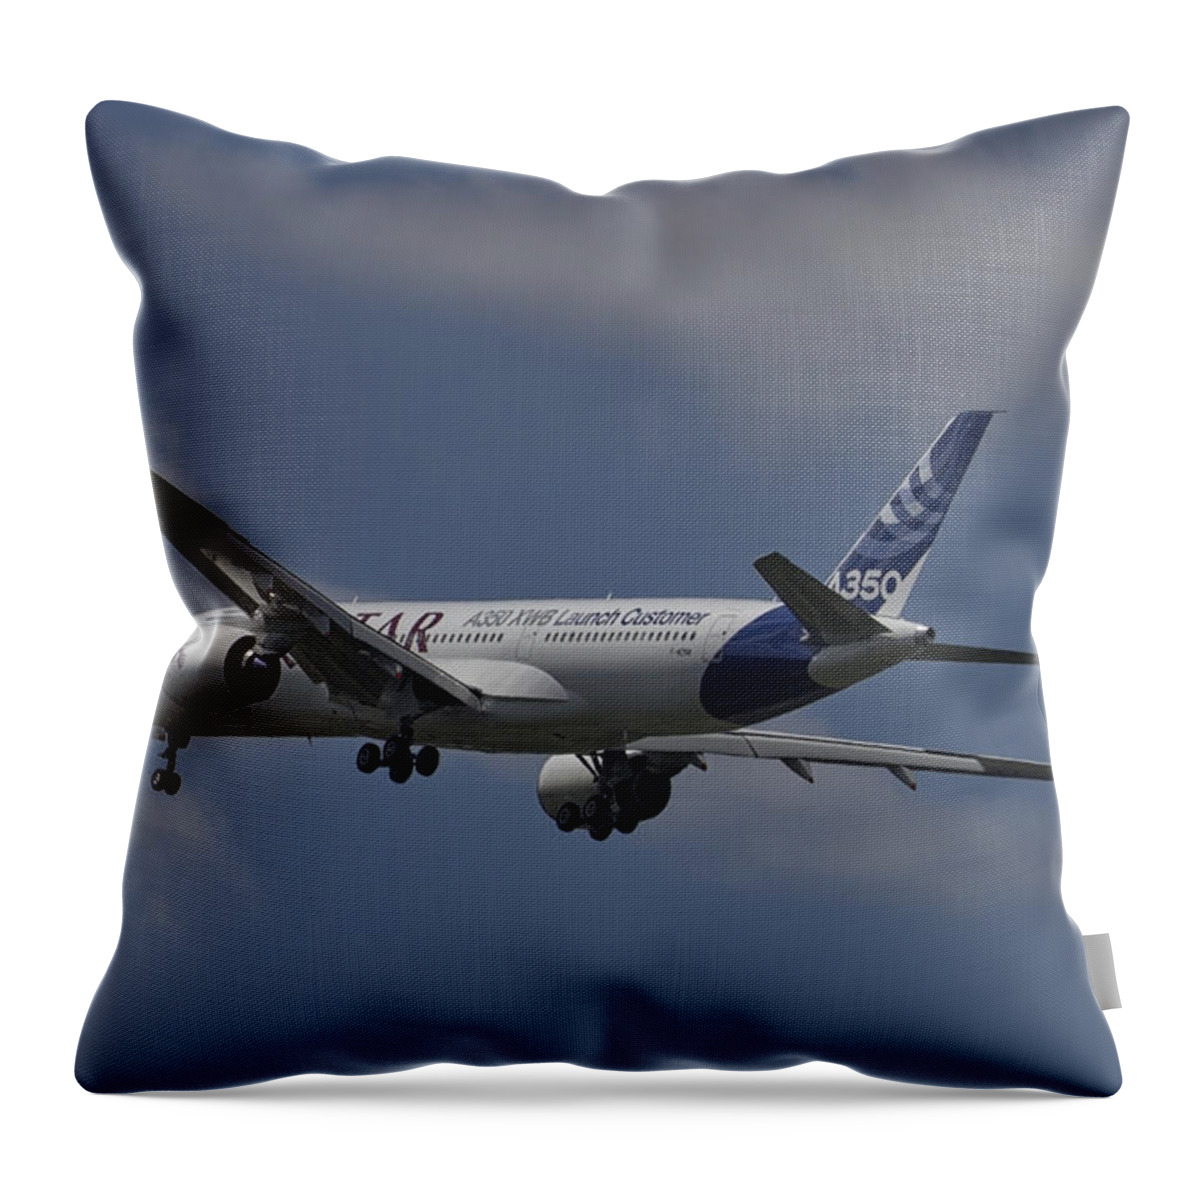 Transportation Throw Pillow featuring the photograph Airbus A350 by Shirley Mitchell